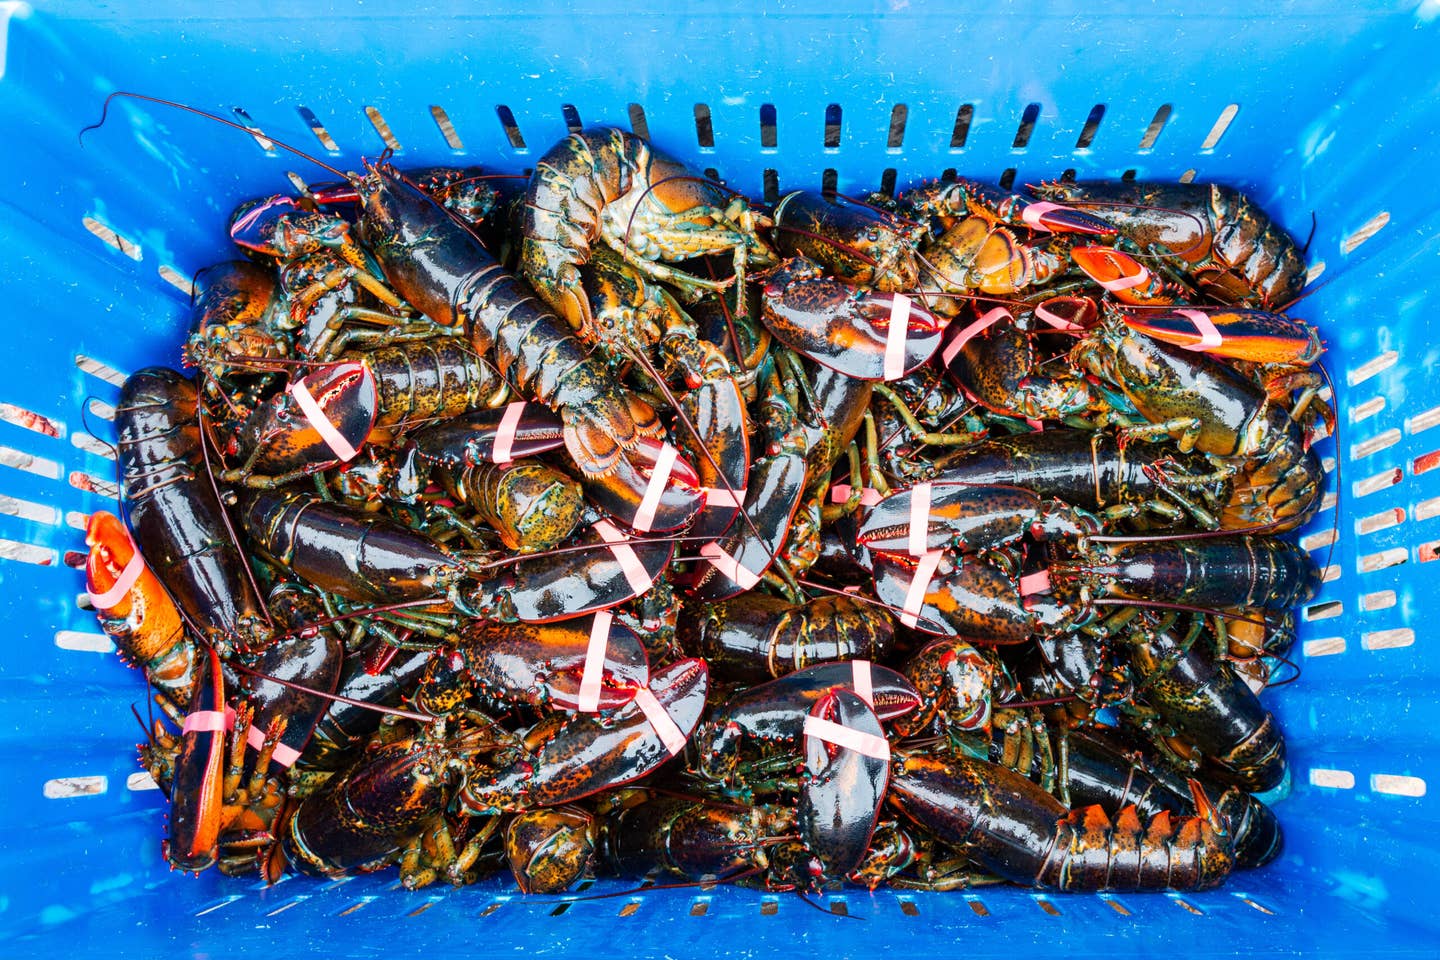 Why Did a Seafood Watch Group Red-List American Lobster—and Cause an Uproar?